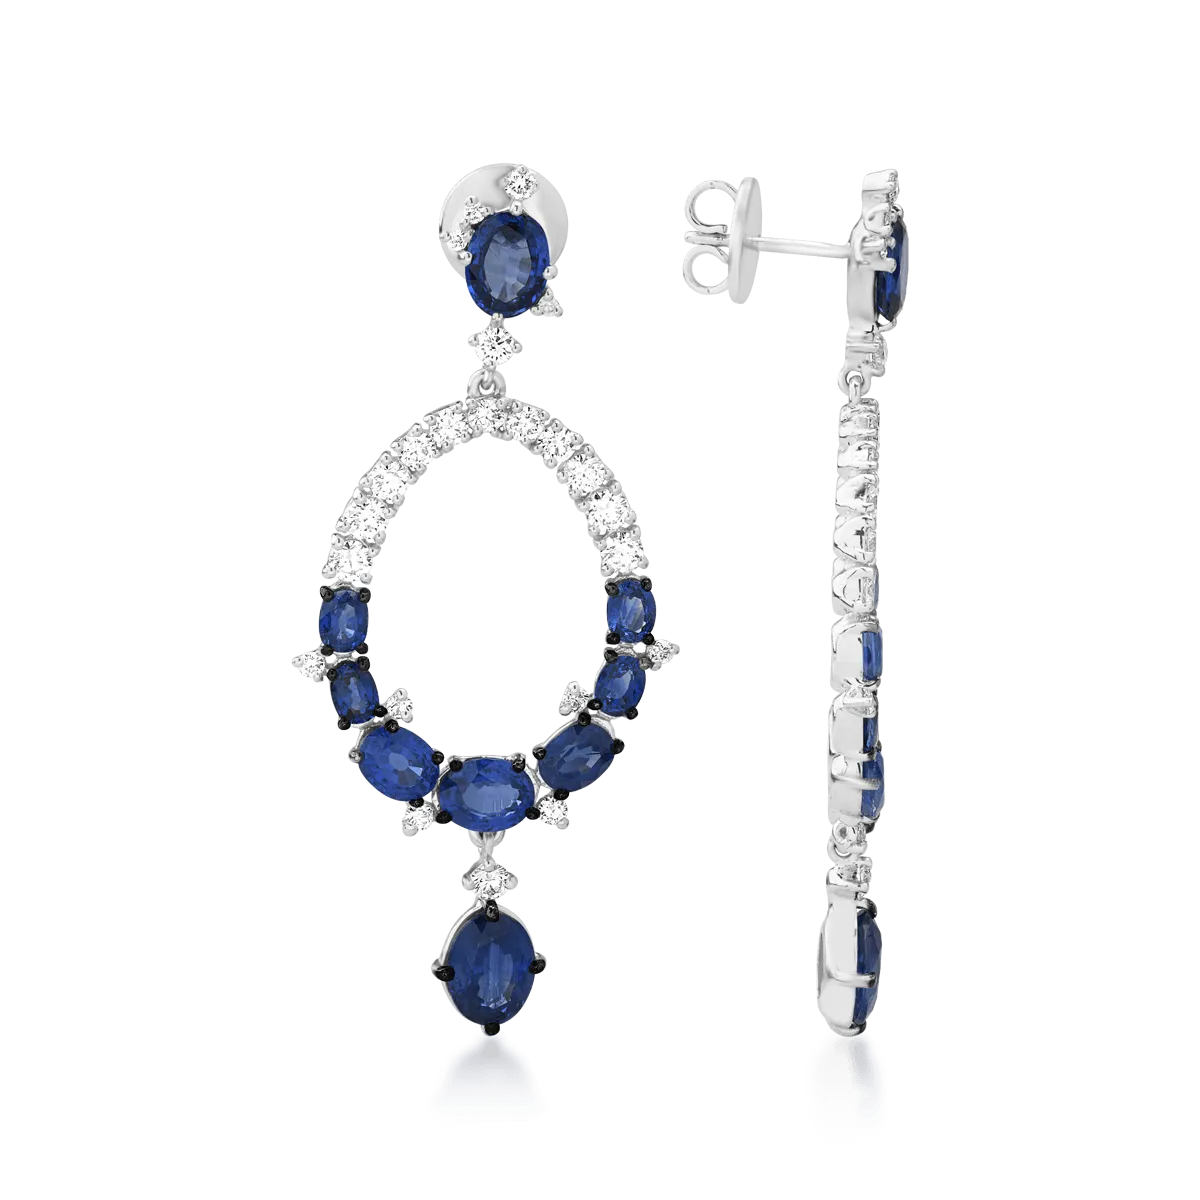 18K white gold earrings with 10.47ct sapphires and 1.96ct diamonds